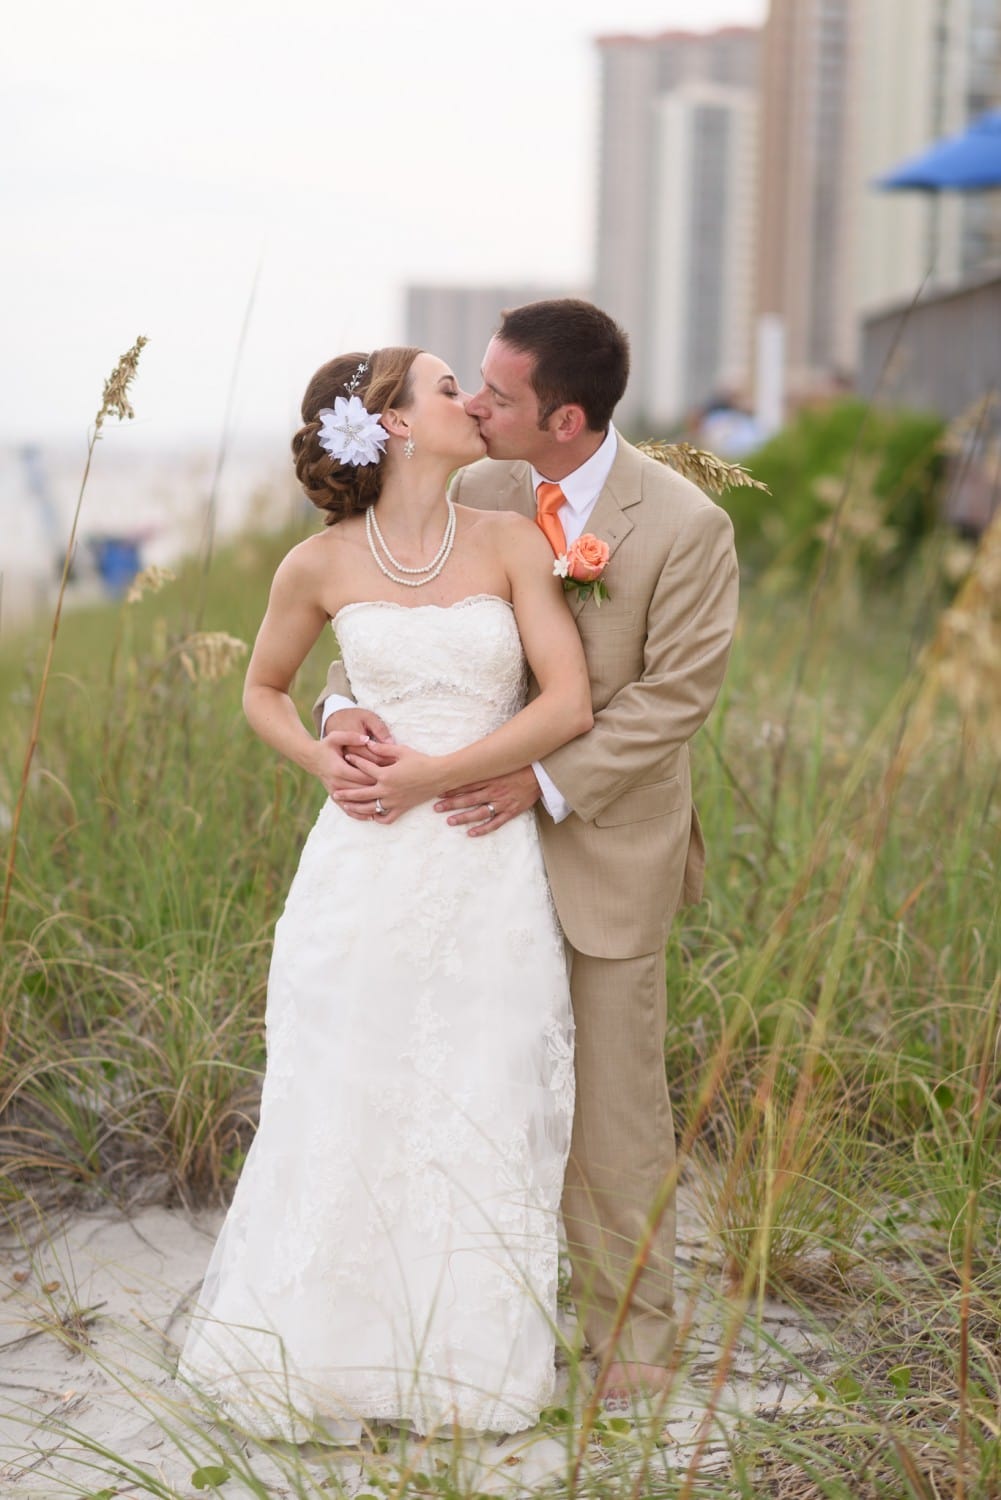 Bride and groom prom pose in the sea oats - Hilton at Kingston Plantation